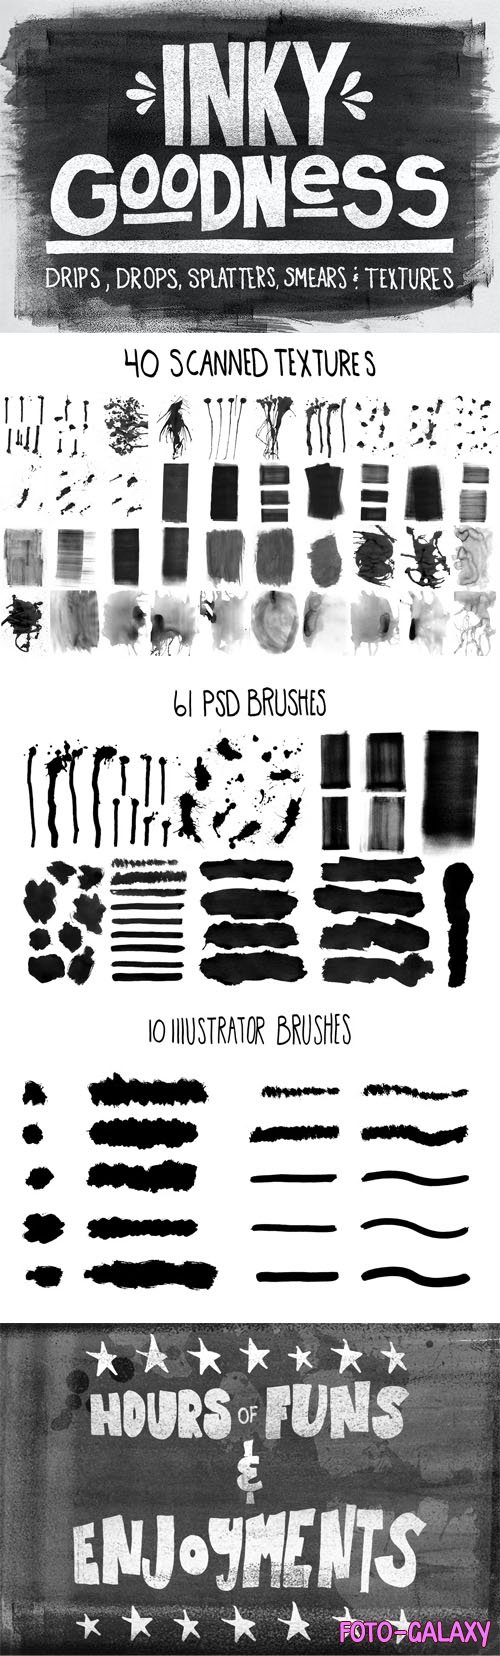 Inky Goodness Brushes for Photoshop & Illustrator + Textures